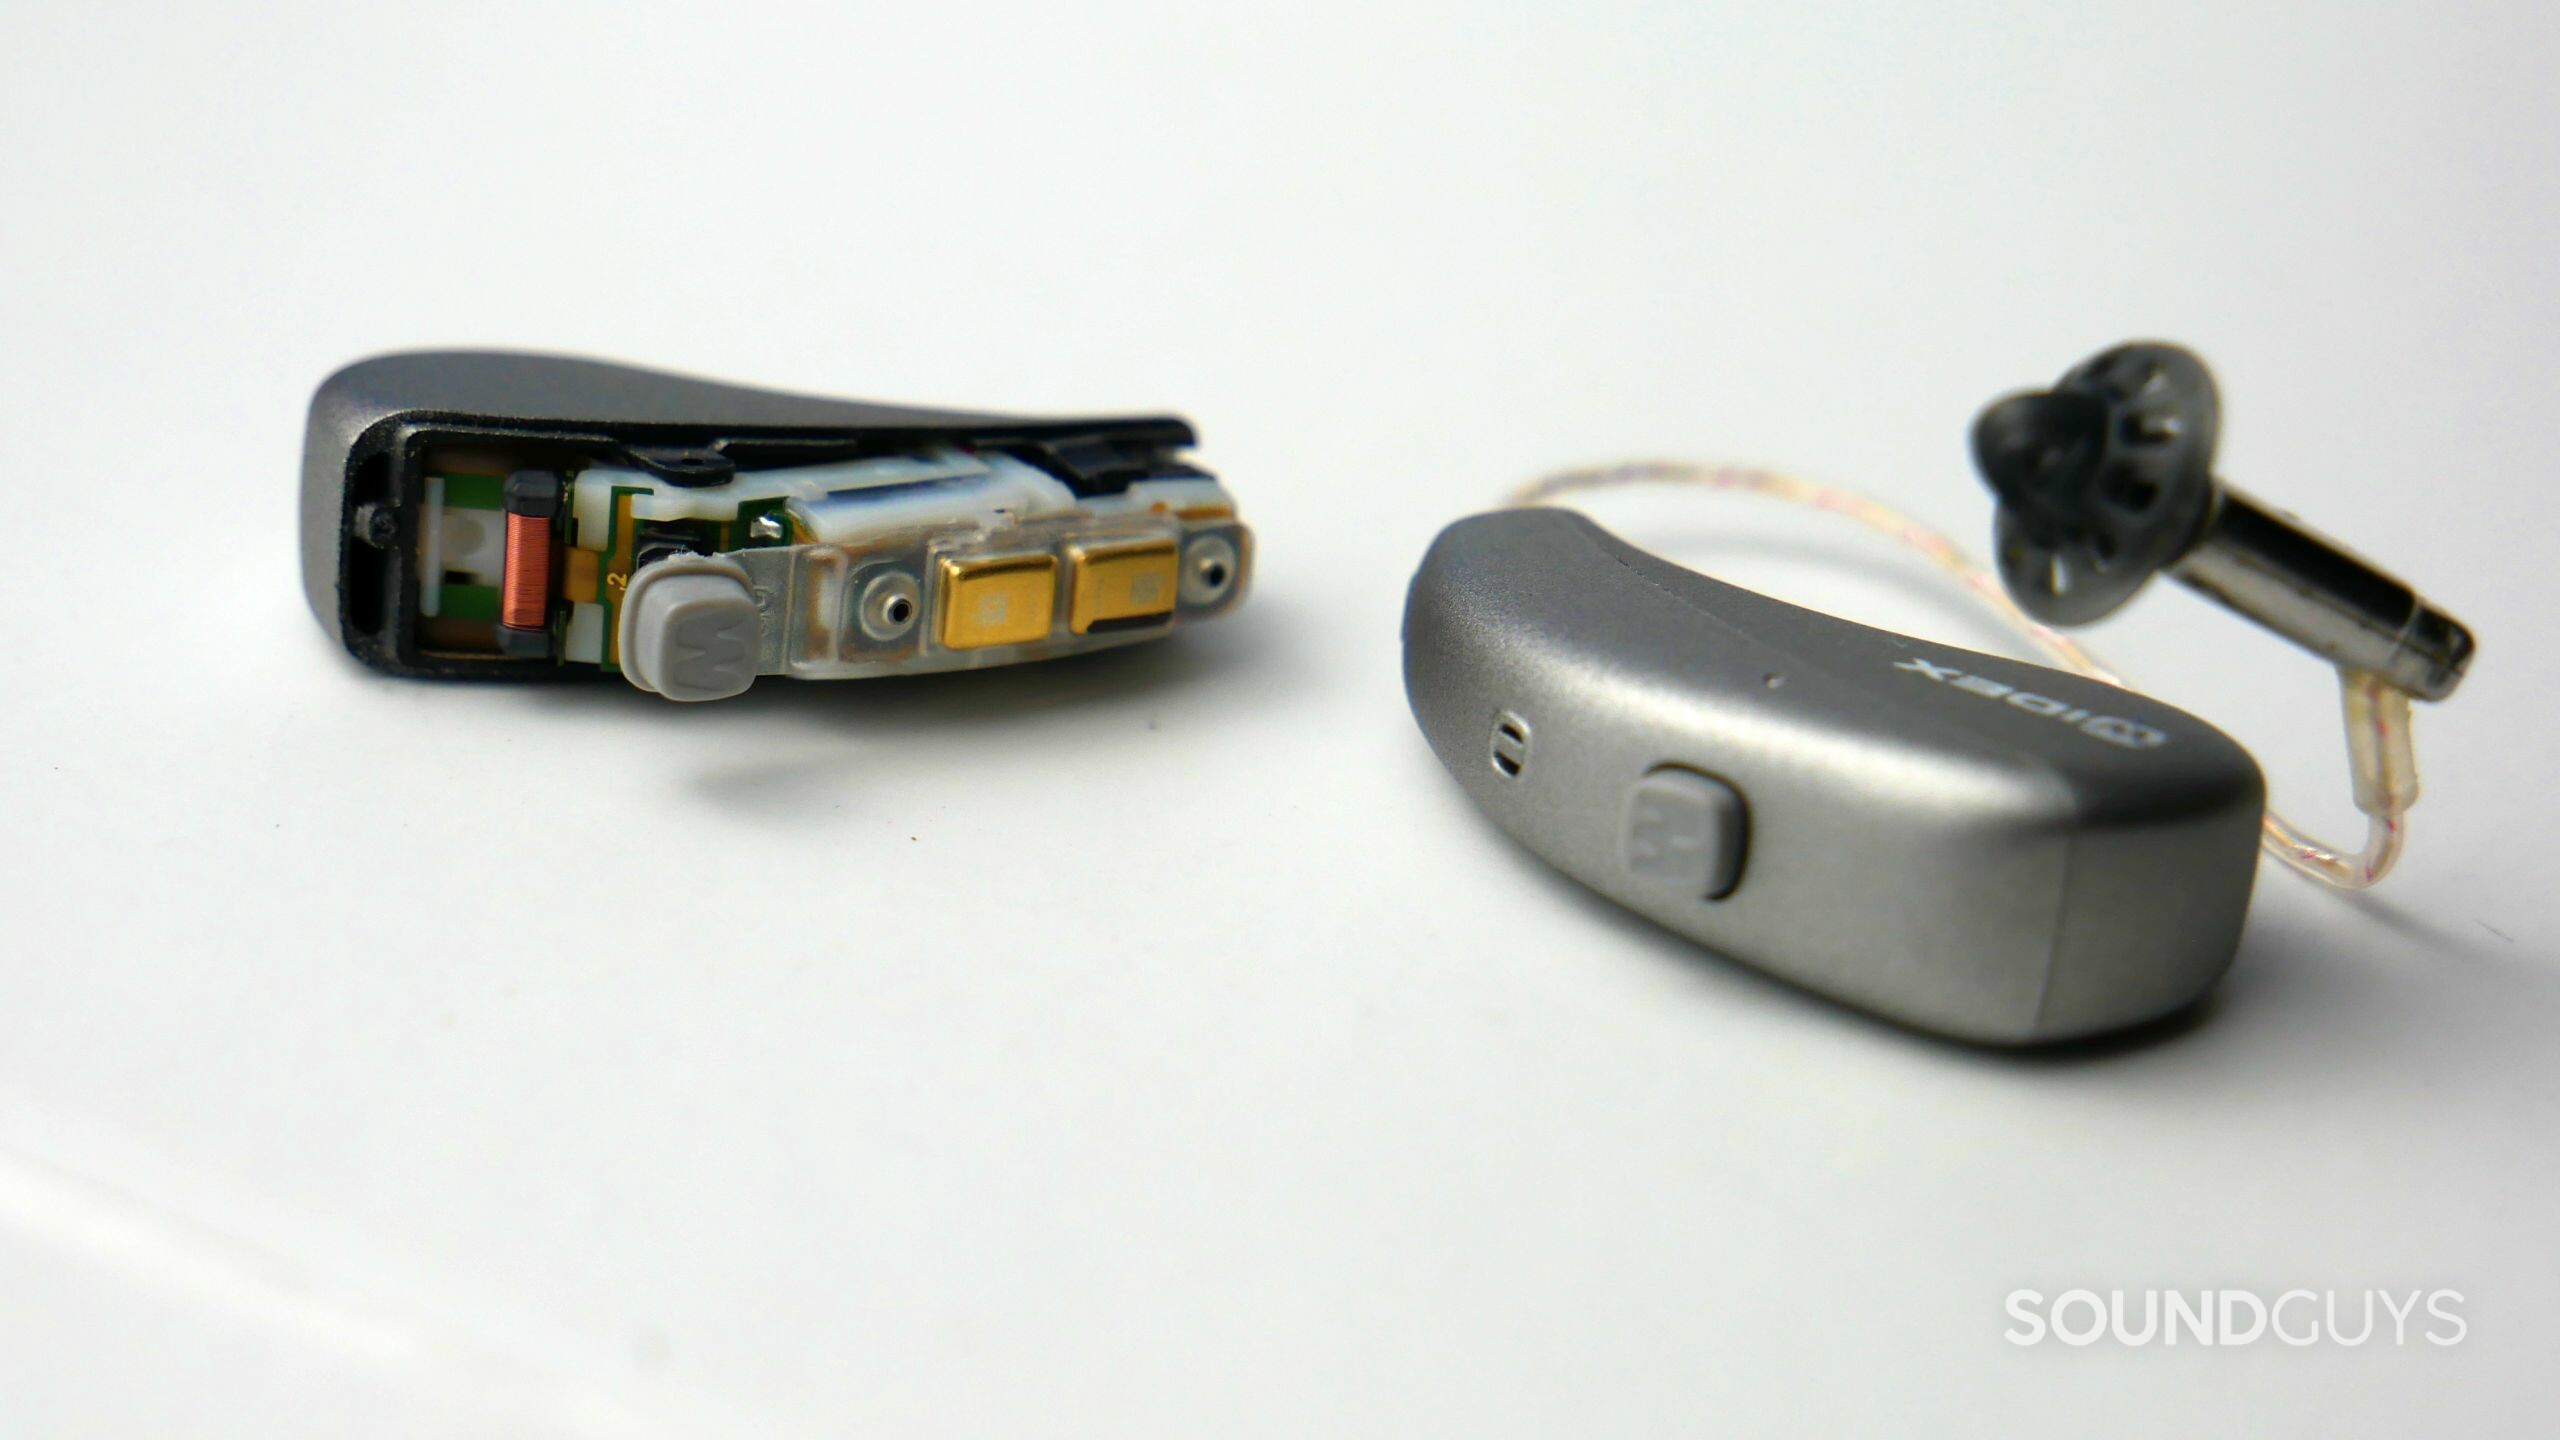 A pair of Widex MOMENT hearing aids with the left one disassembled to expose its telecoil.